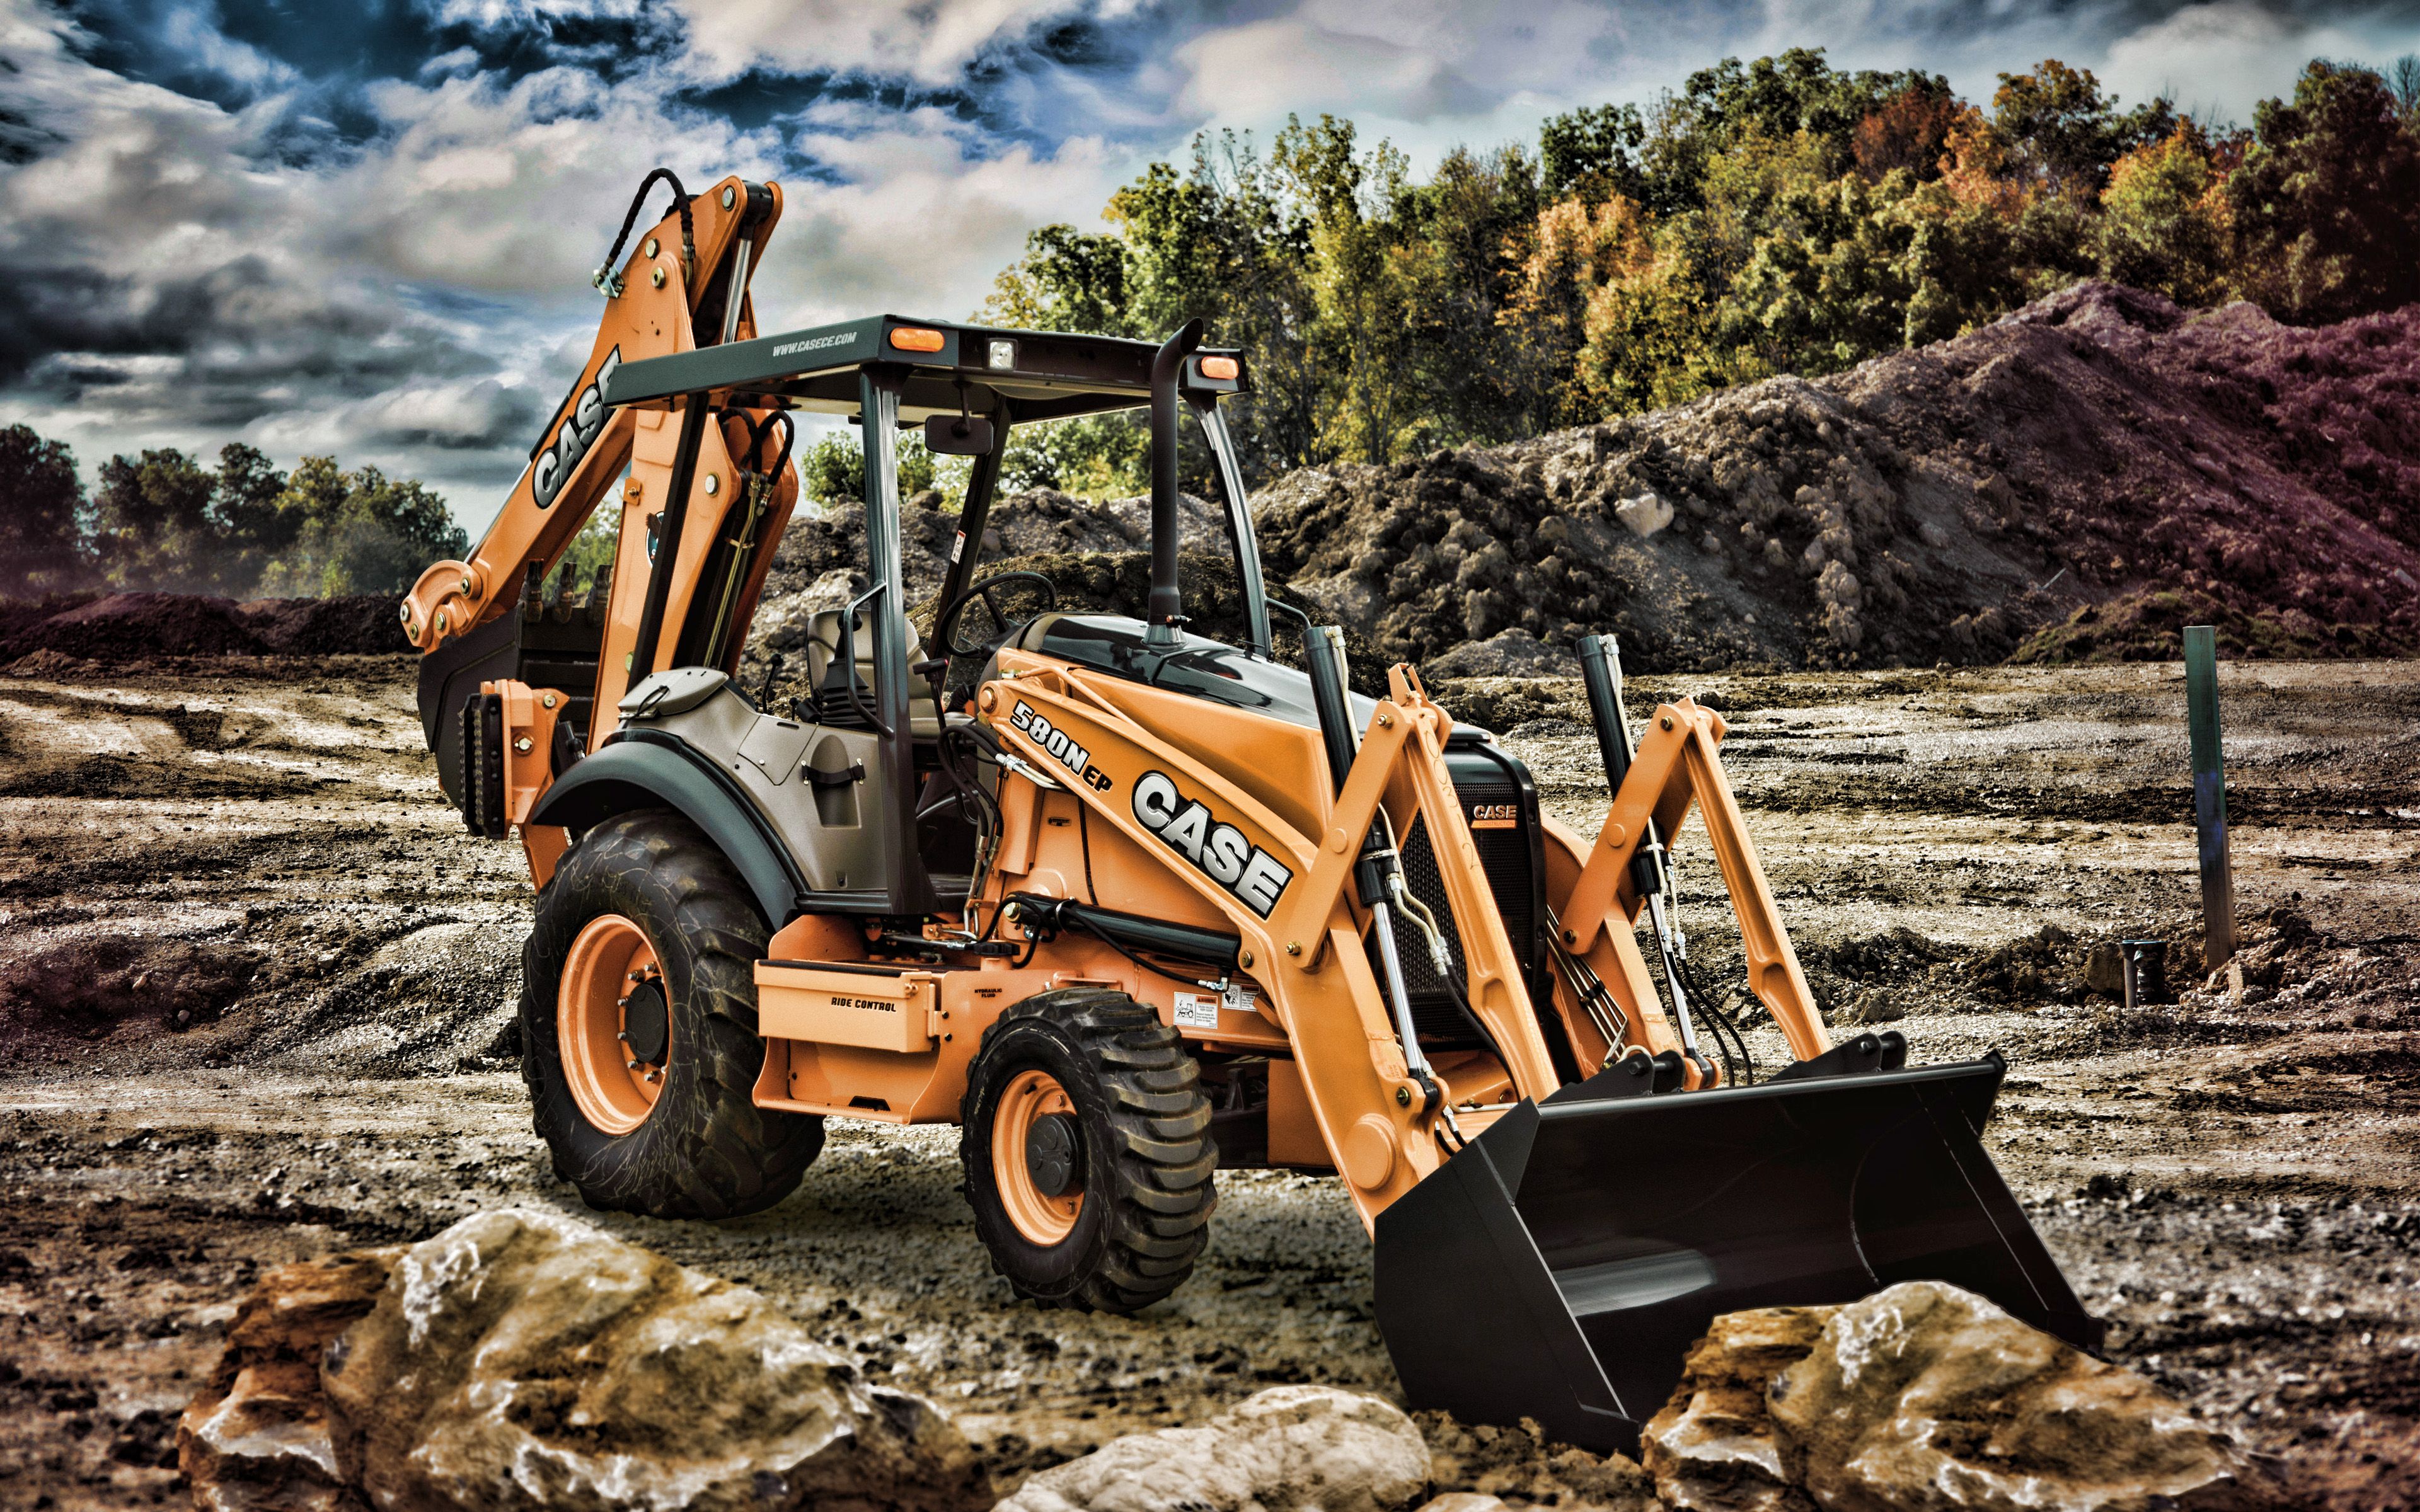 Download wallpaper CASE 580N EP, 4k, Backhoe Loader, 2019 tractors, construction machinery, tractor in career, N Series Backhoe Loaders, Case for desktop with resolution 3840x2400. High Quality HD picture wallpaper